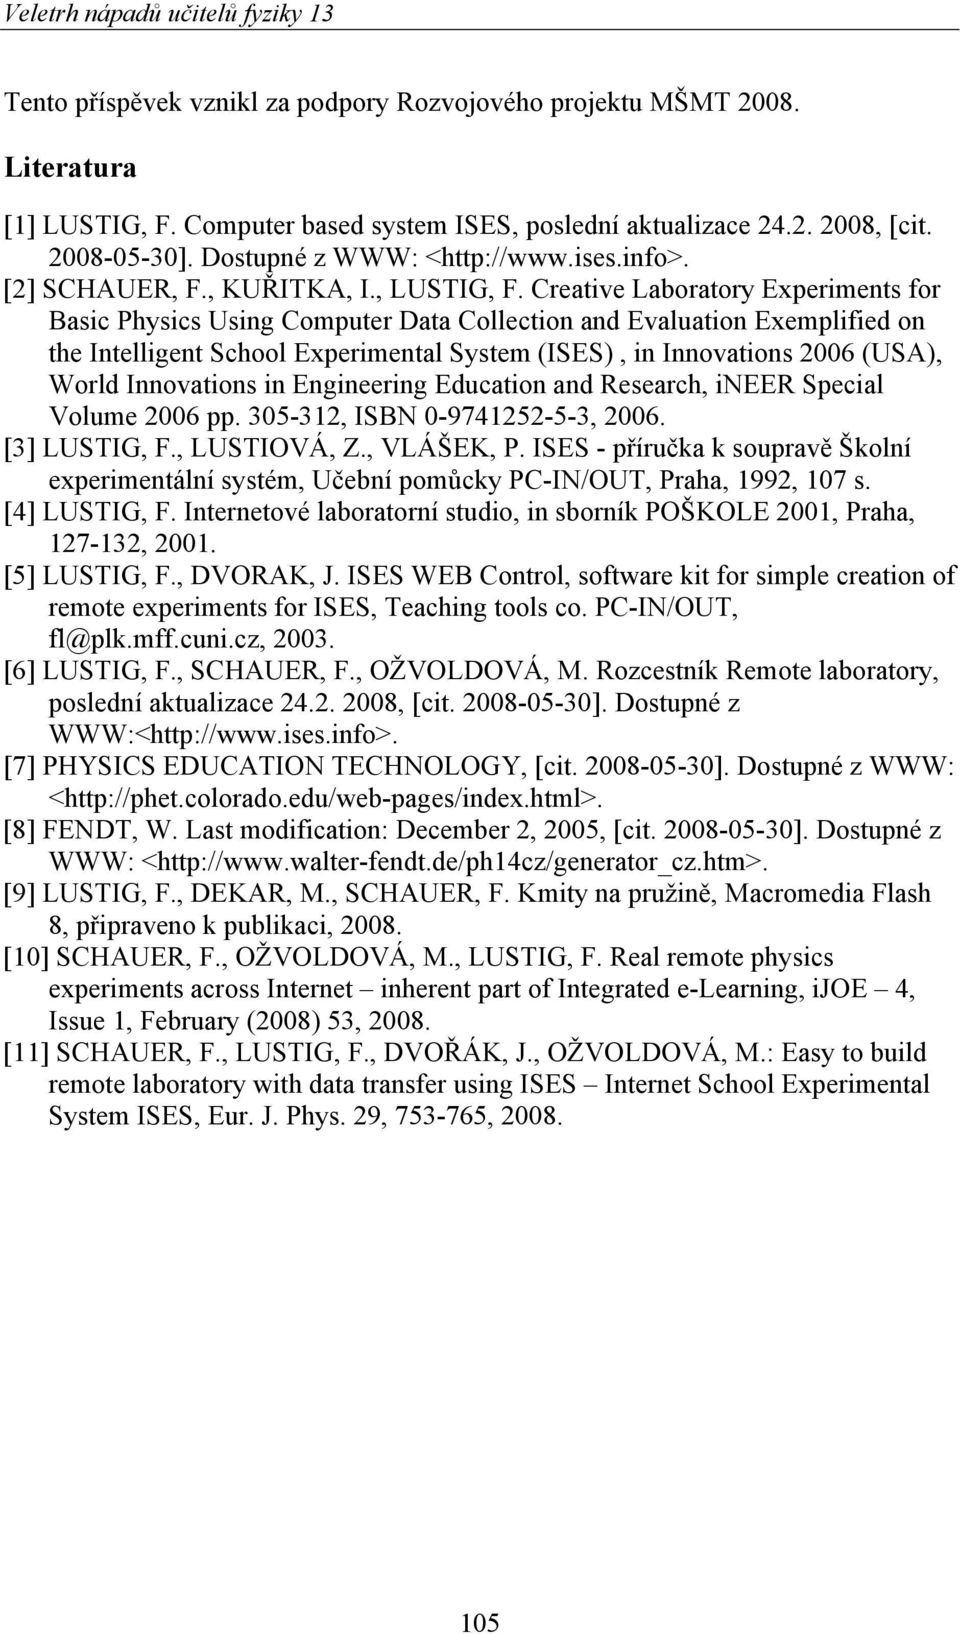 Creative Laboratory Experiments for Basic Physics Using Computer Data Collection and Evaluation Exemplified on the Intelligent School Experimental System (ISES), in Innovations 2006 (USA), World